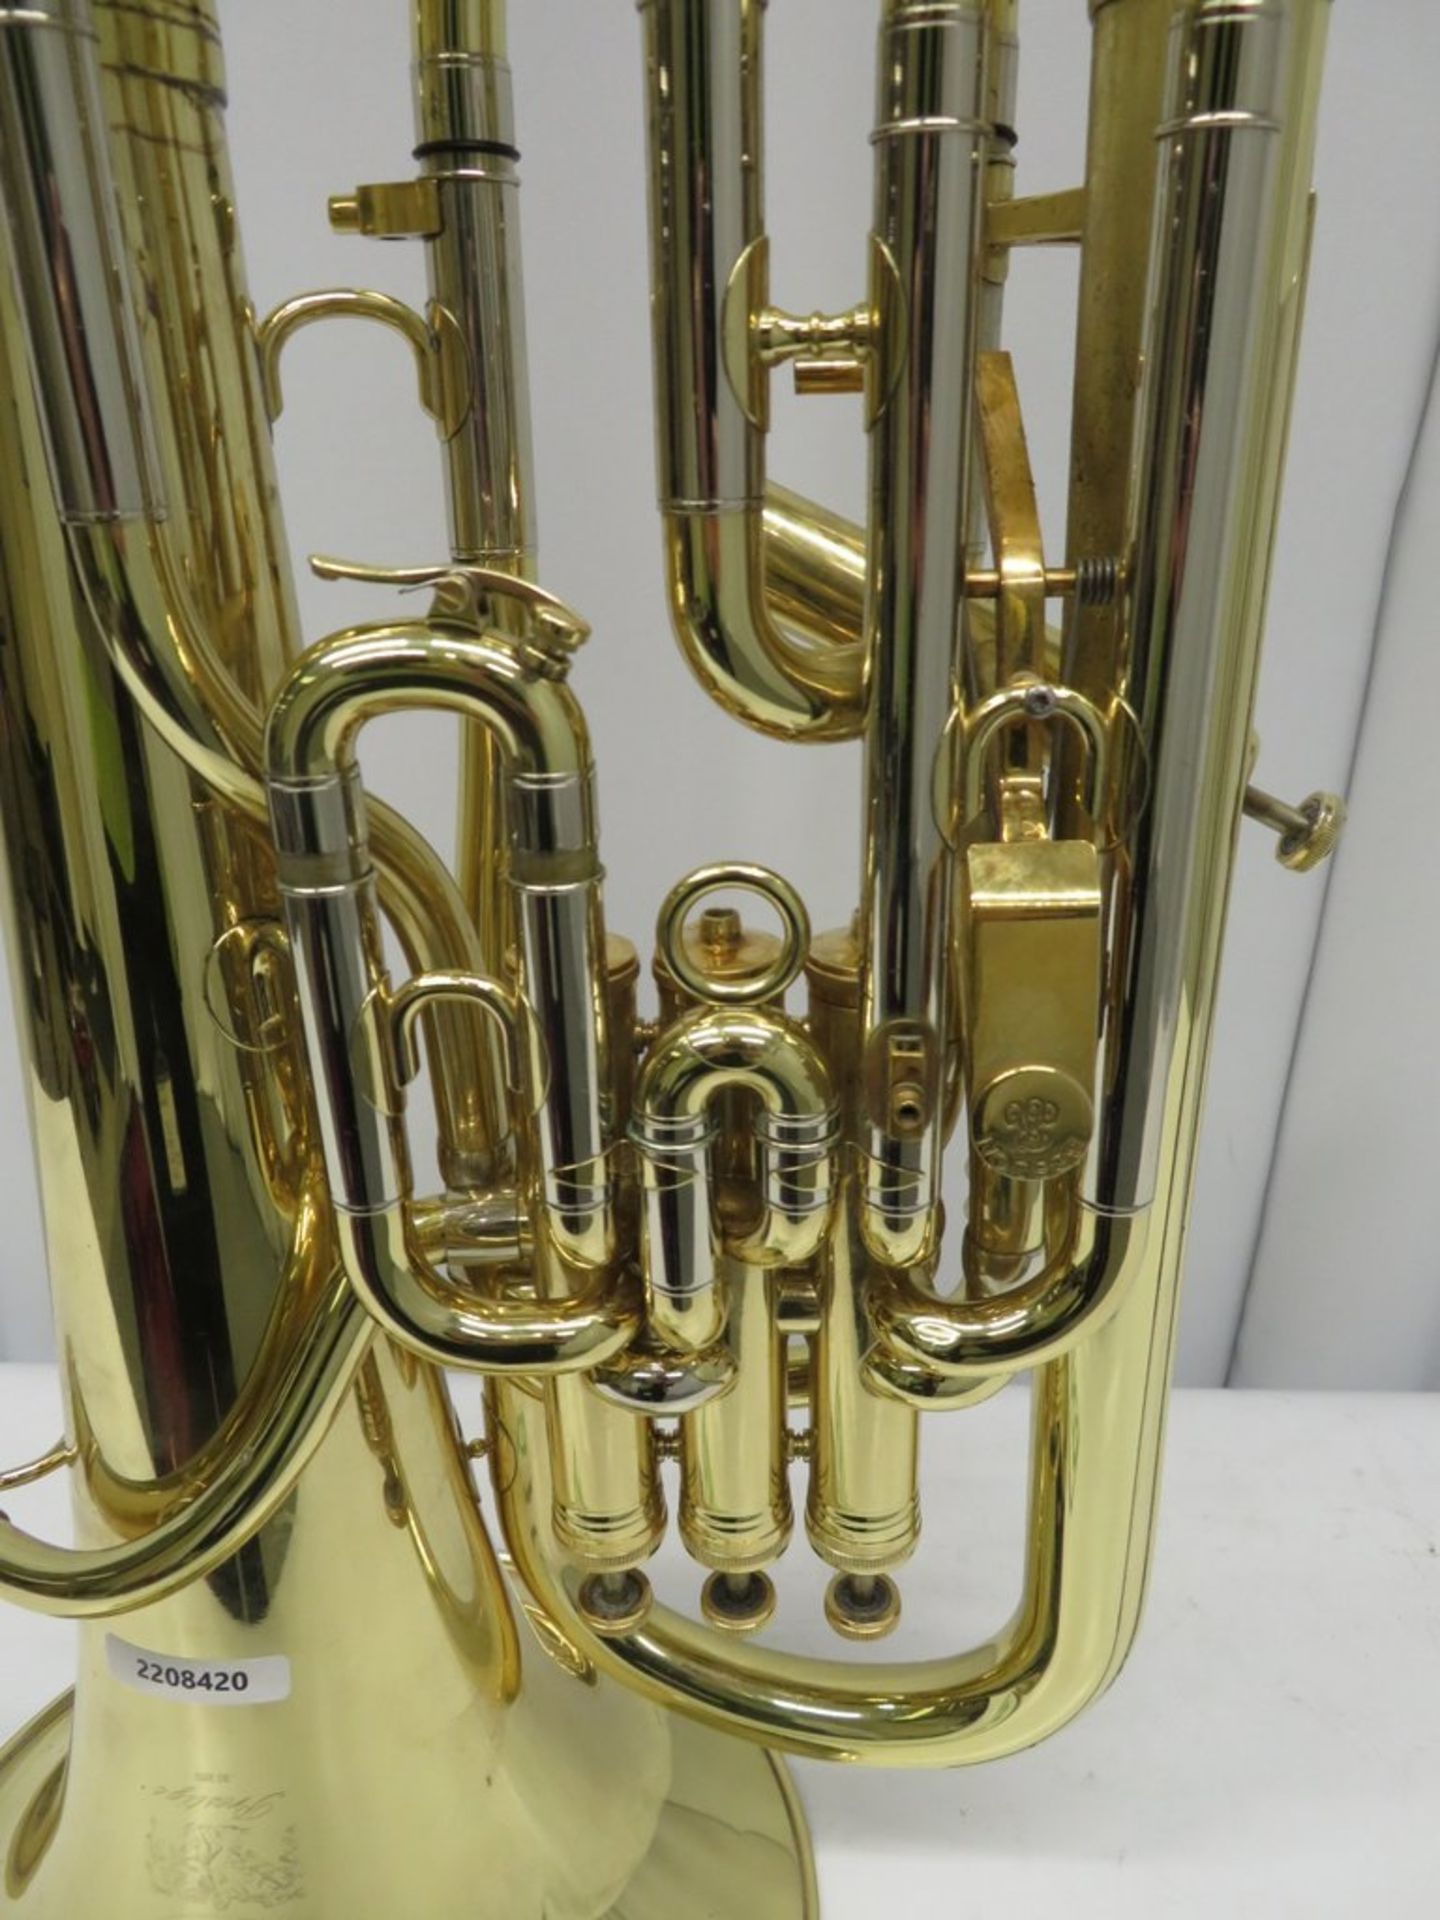 Besson Prestige BE2052 Euphonium With Case. Serial Number: 08300275. Please Note This Ite - Image 5 of 16